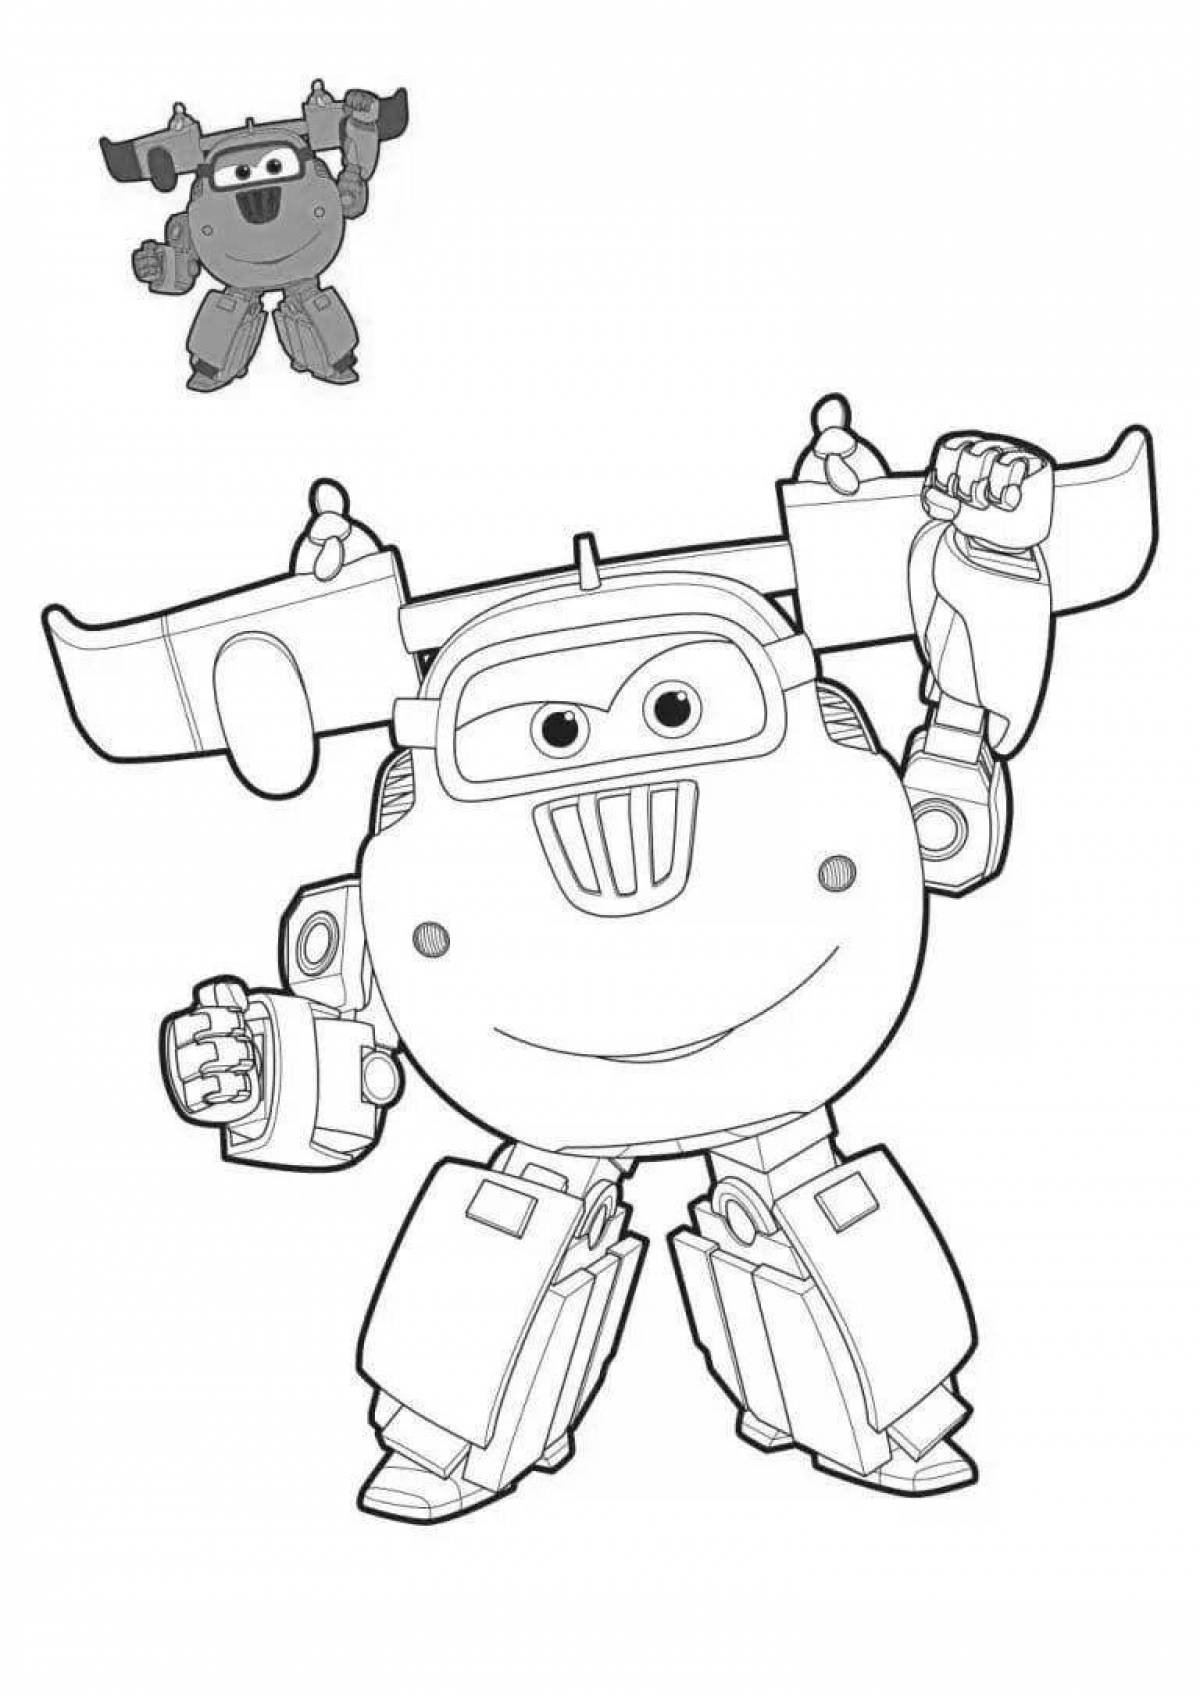 Coloring page sweet donnie super wings